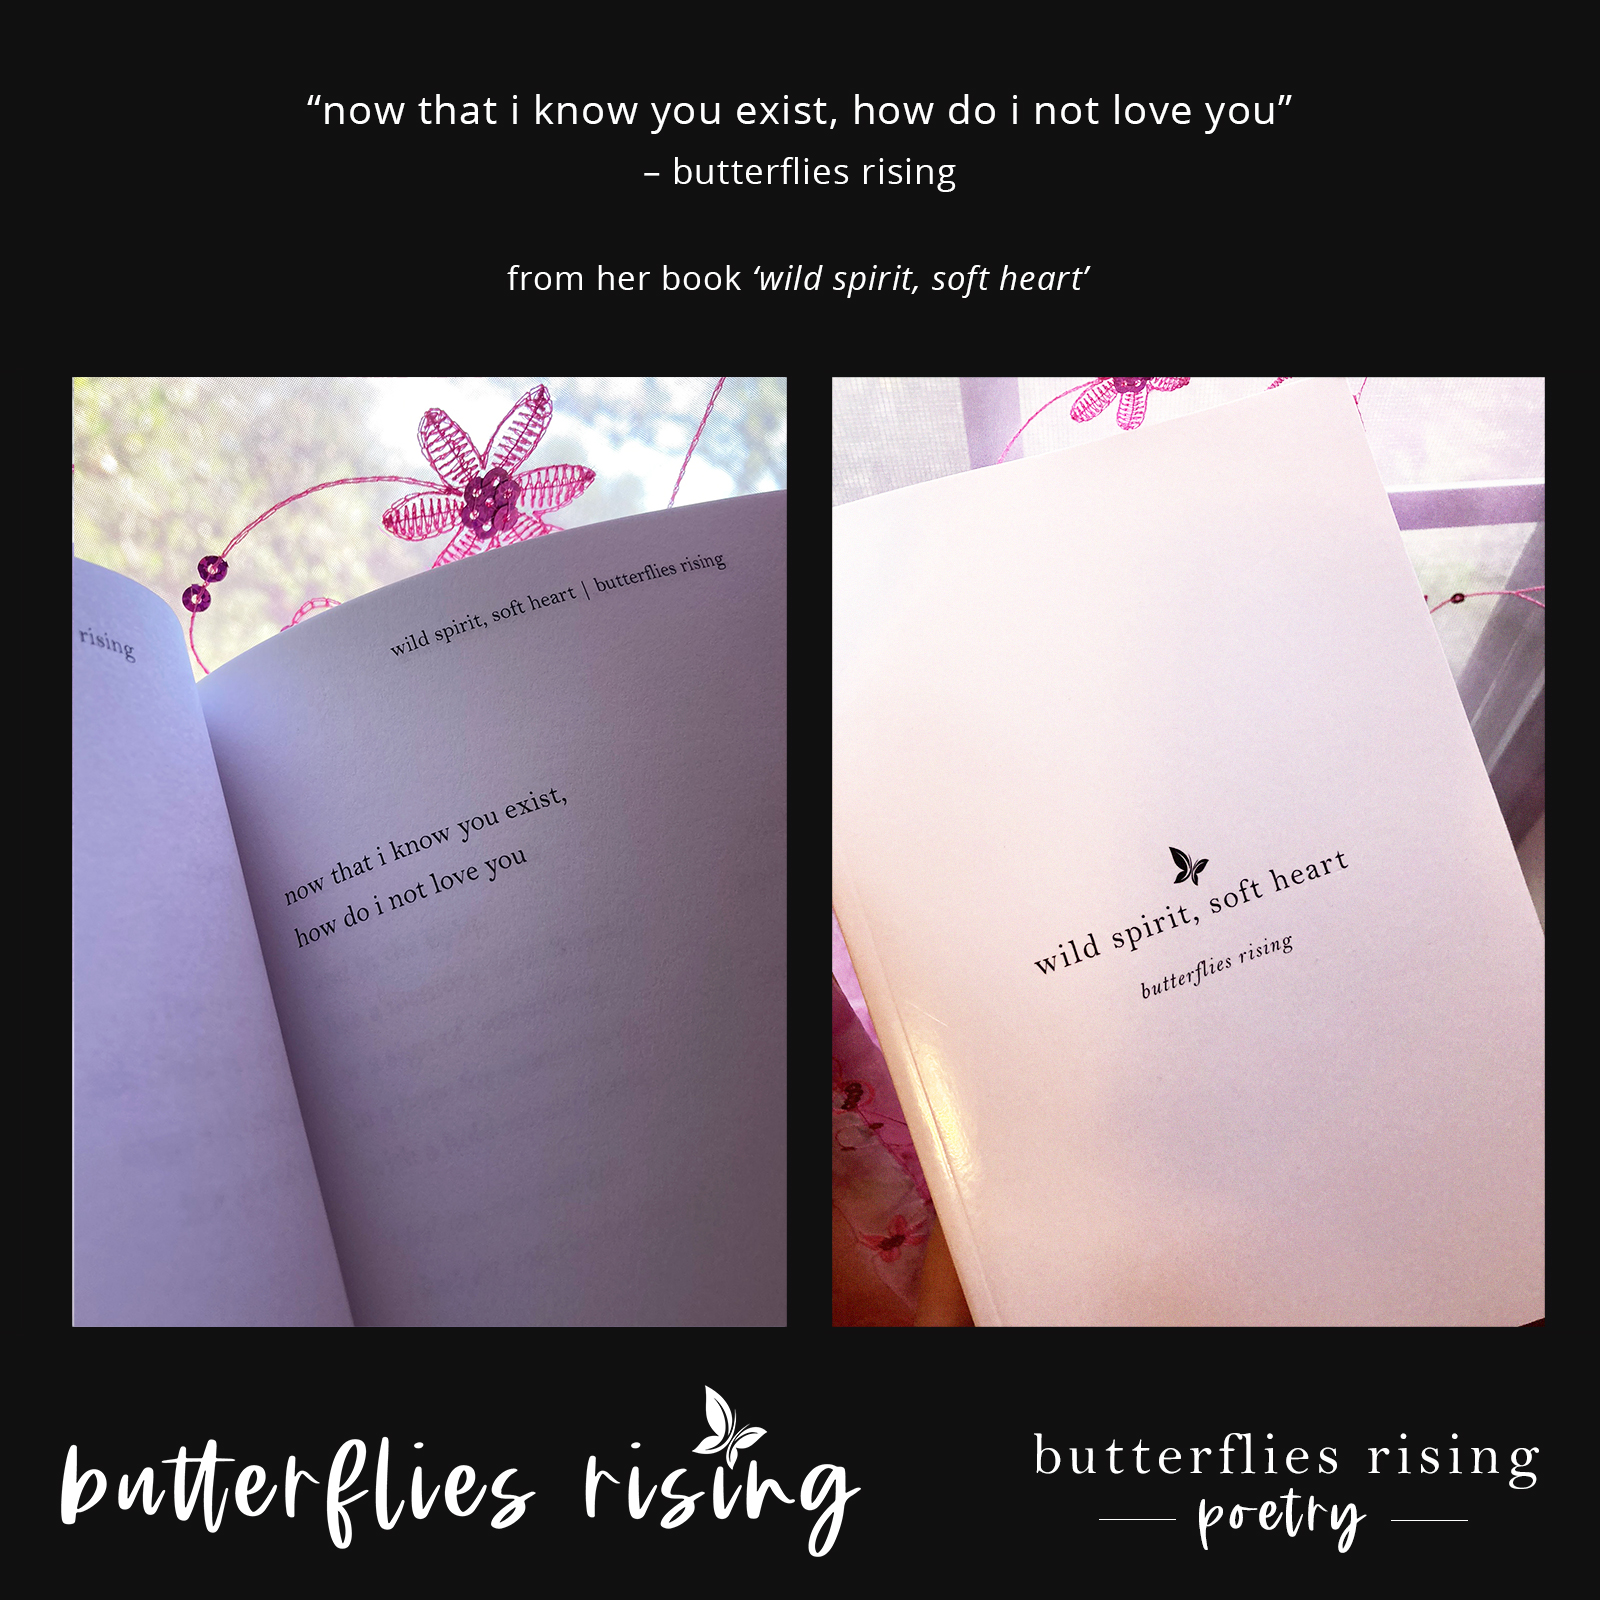 now that i know you exist, how do i not love you - butterflies rising